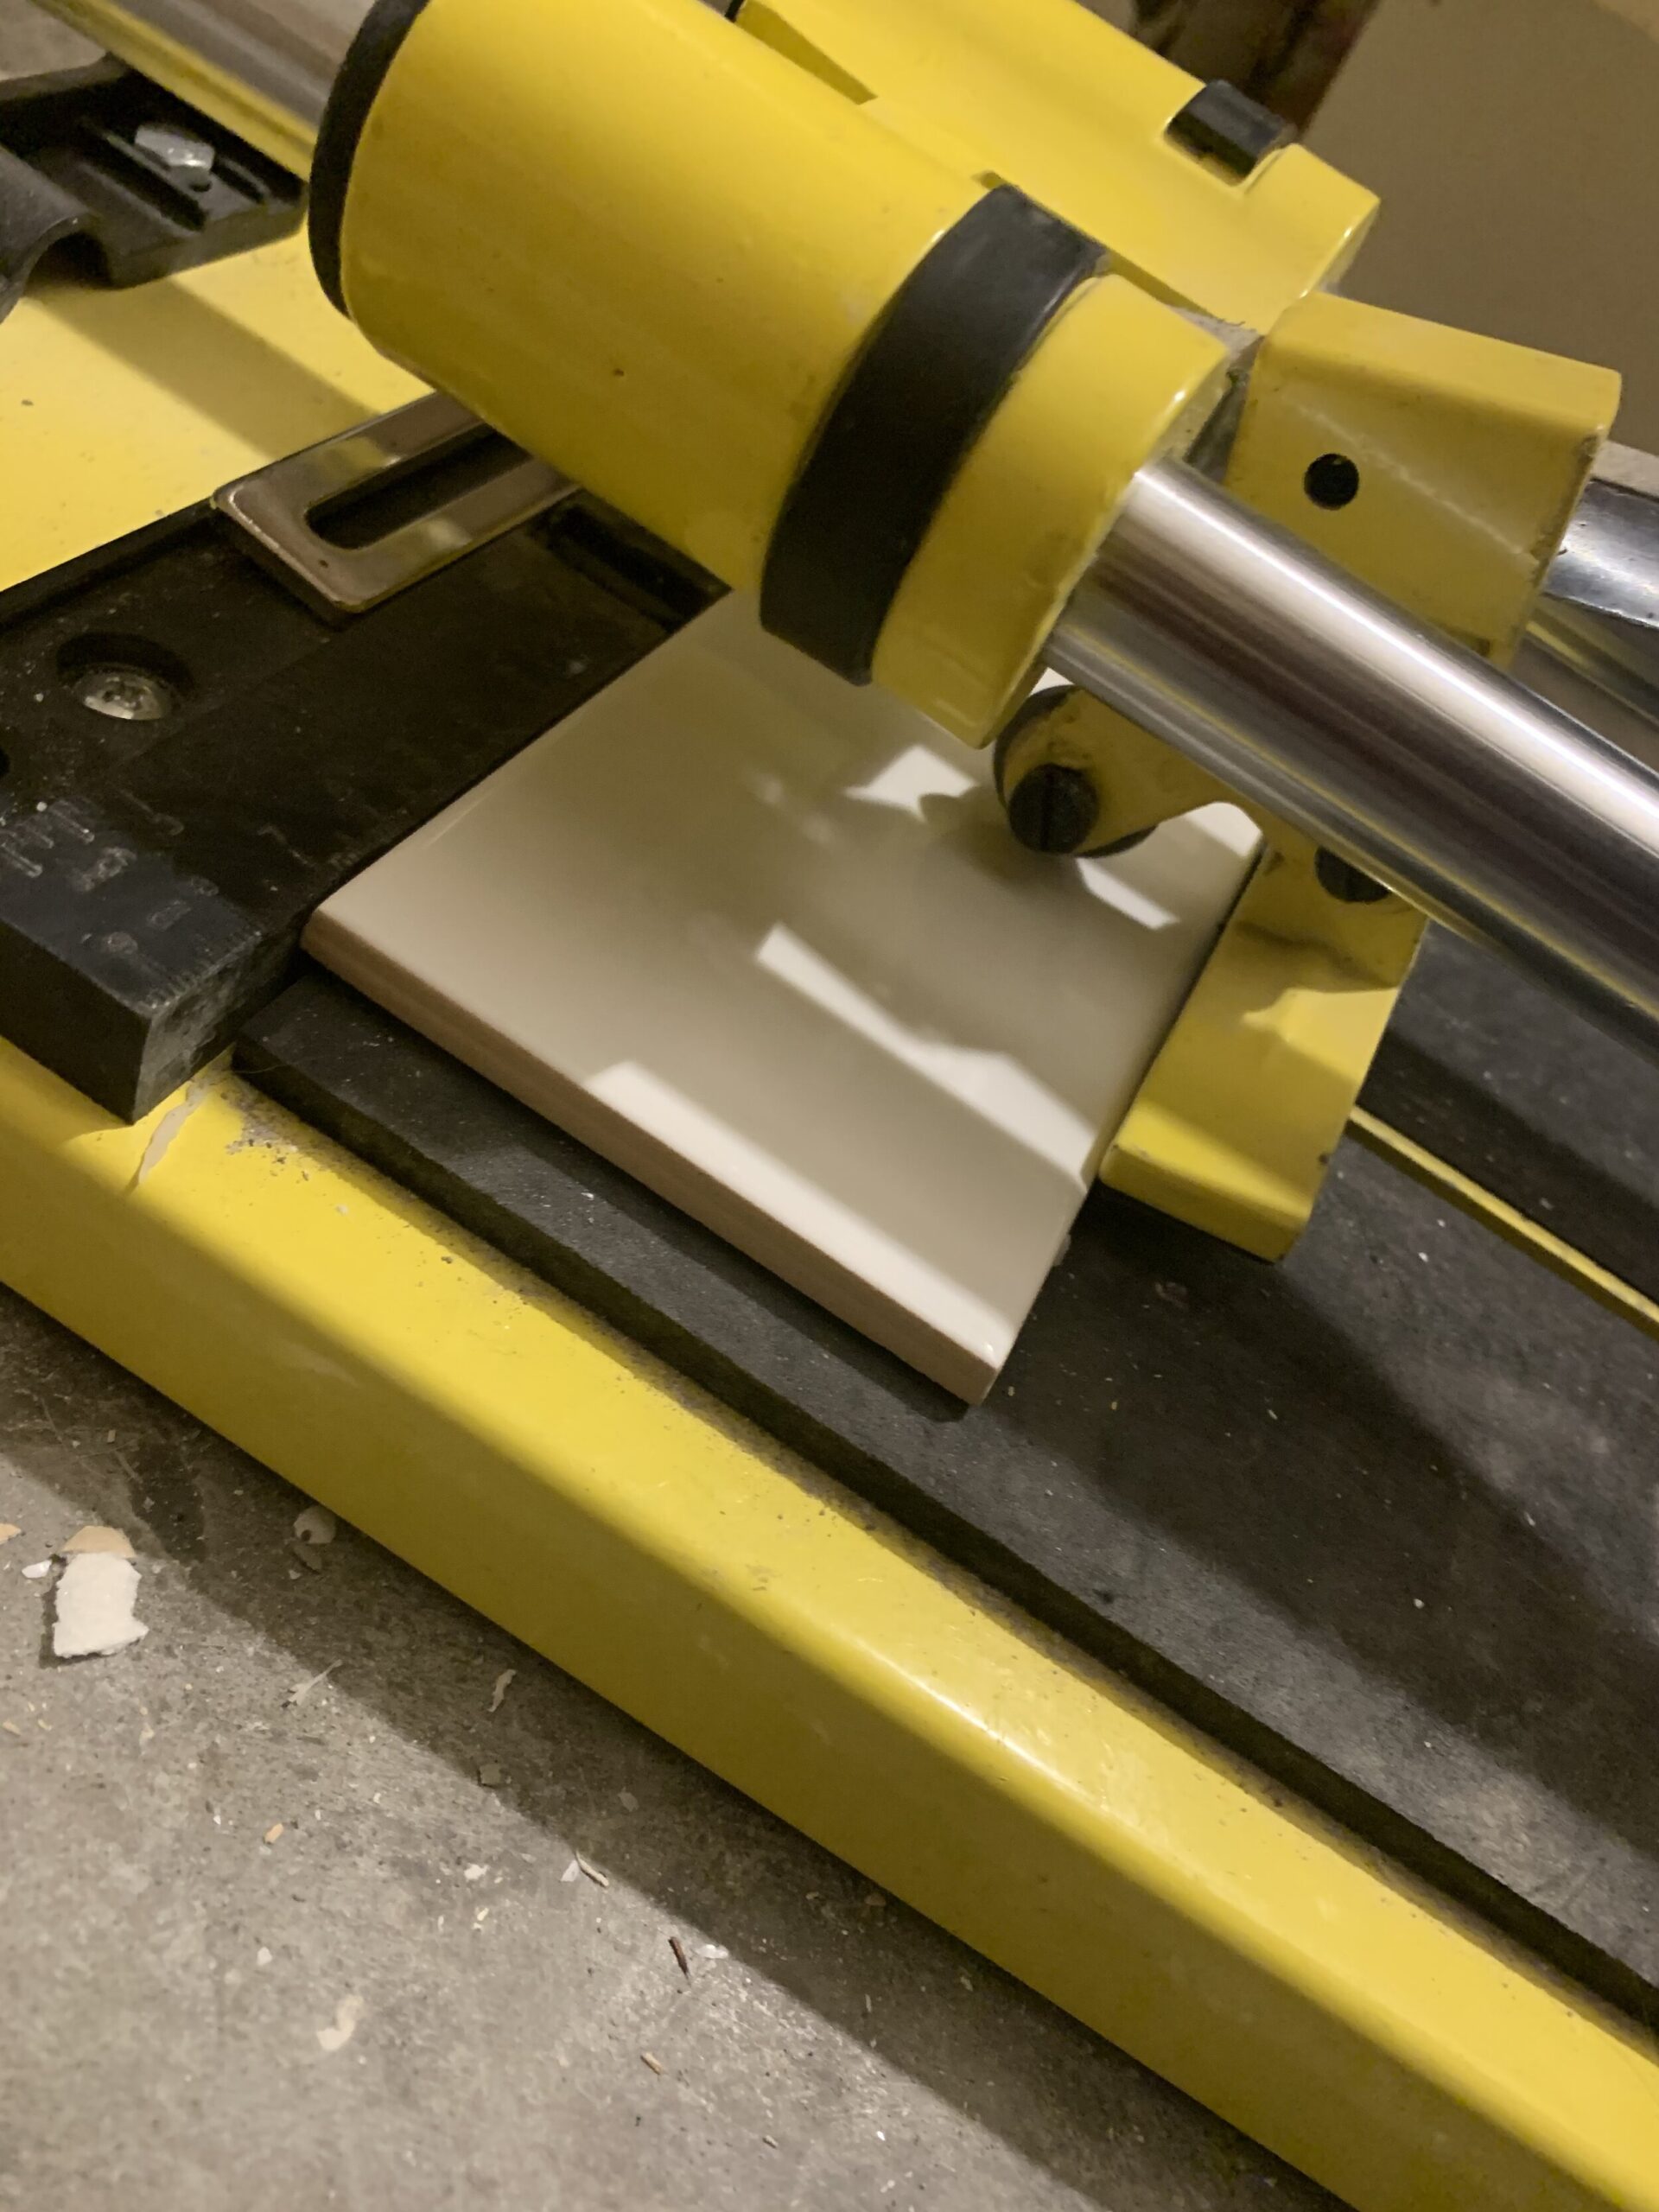 using a tile cutter, scoring a subway tile with a cutting wheel